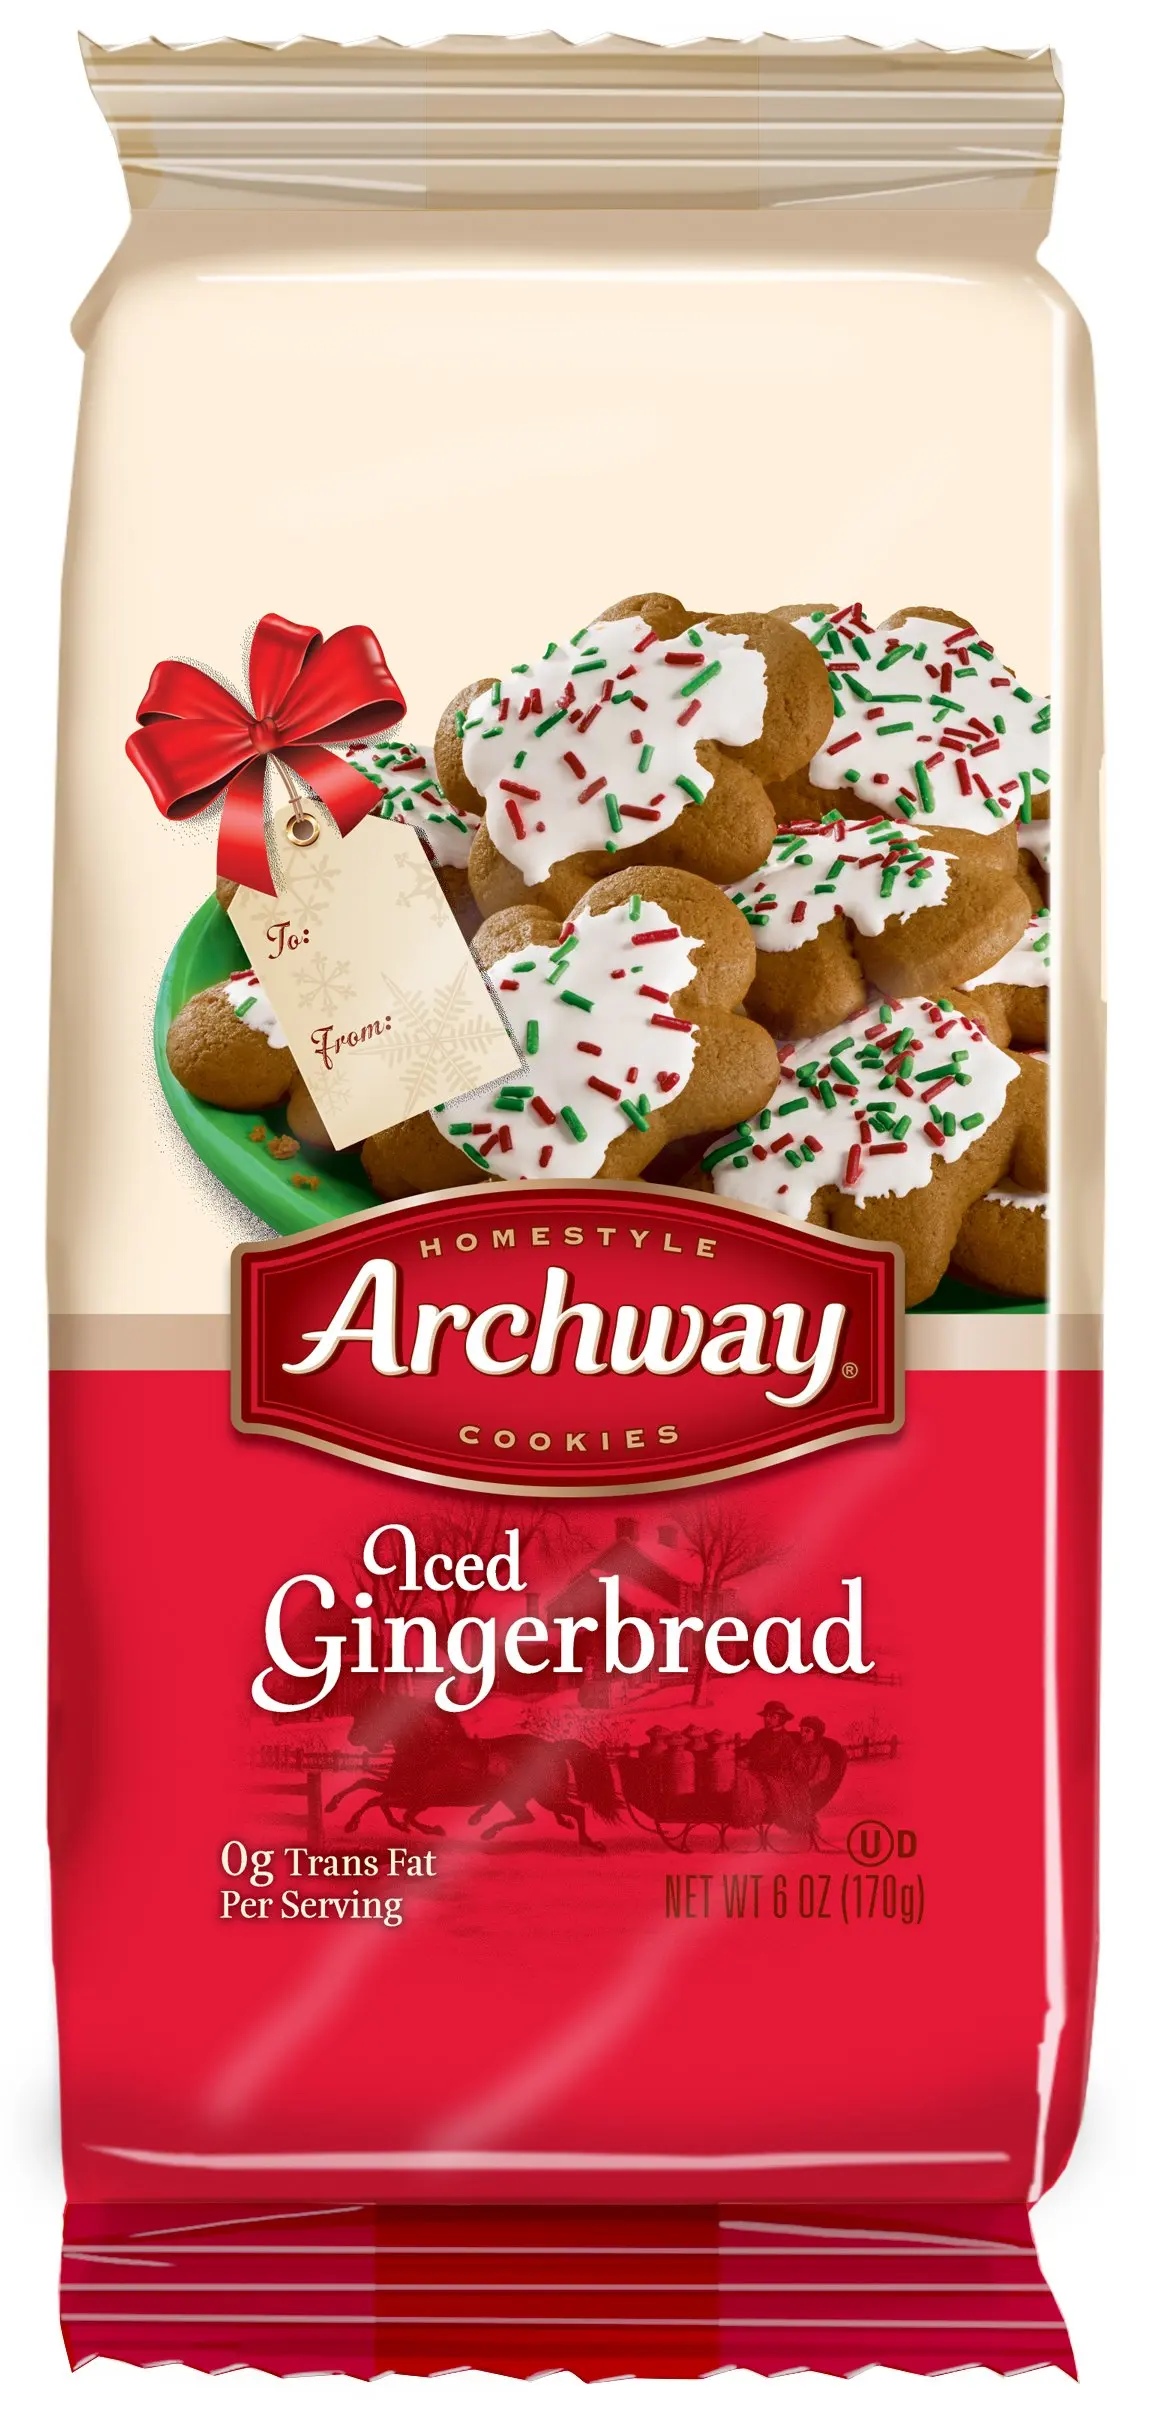 Cheap Archway Cookies Find Archway Cookies Deals On Line At Alibaba Com